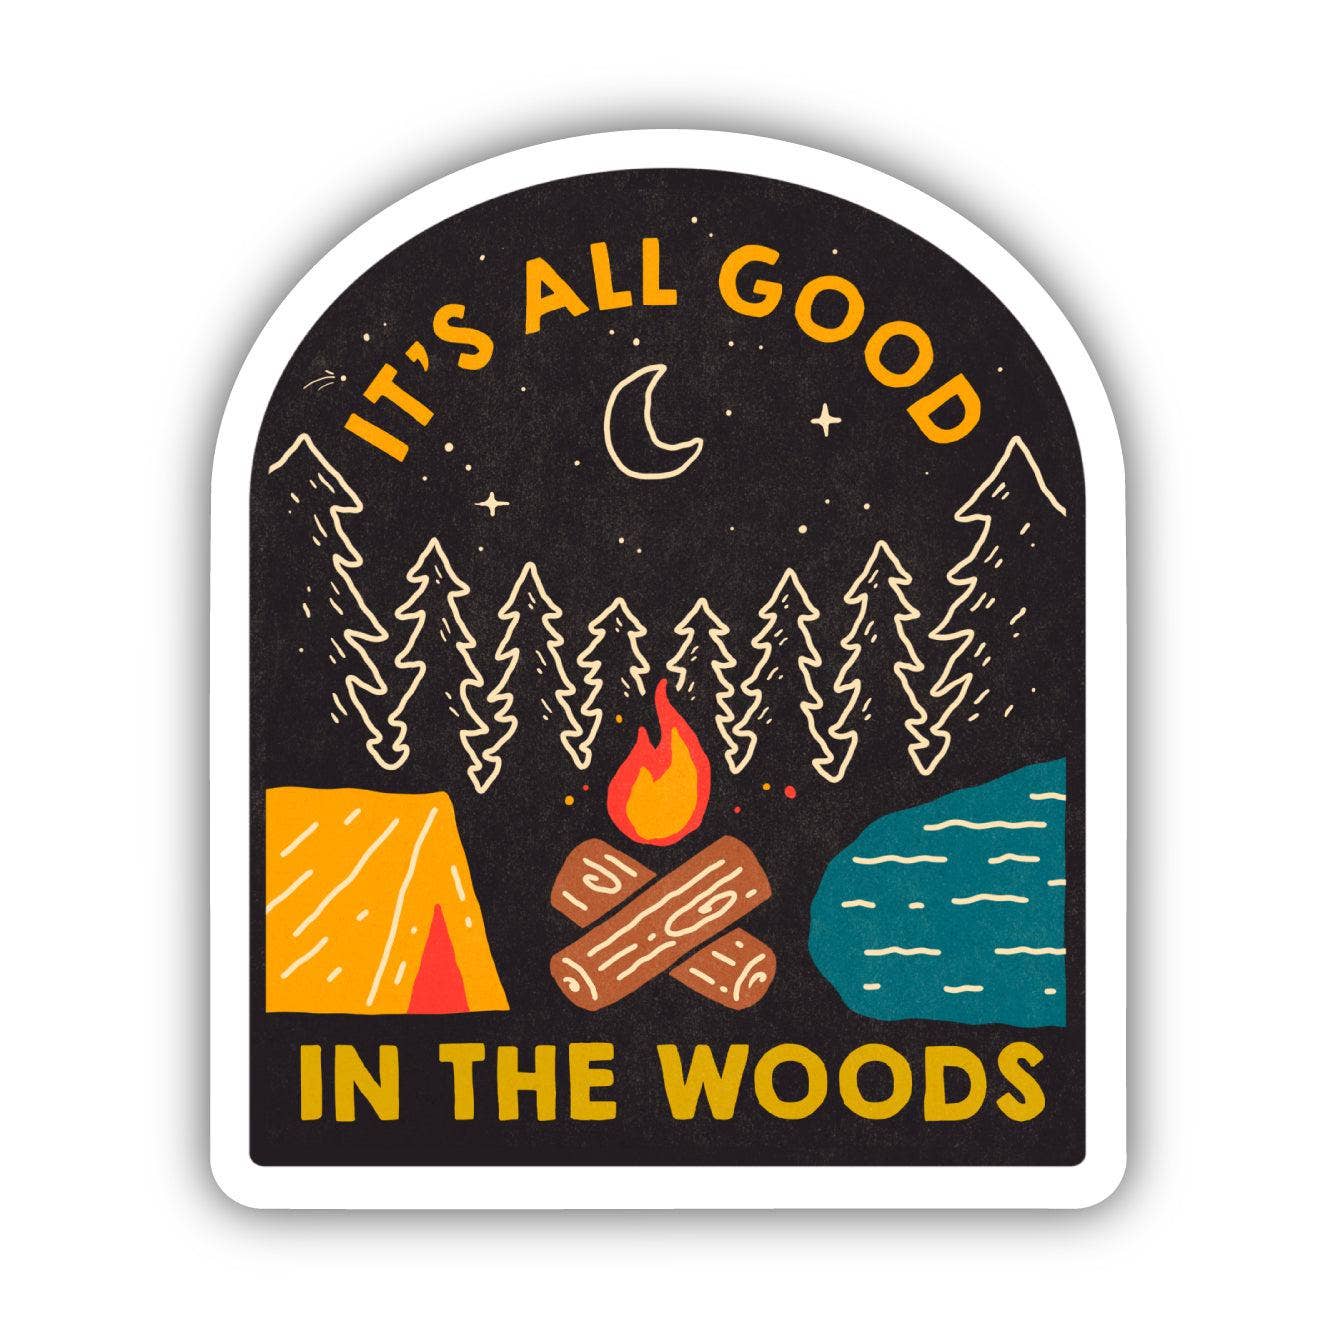 It's All Good In The Woods Sticker